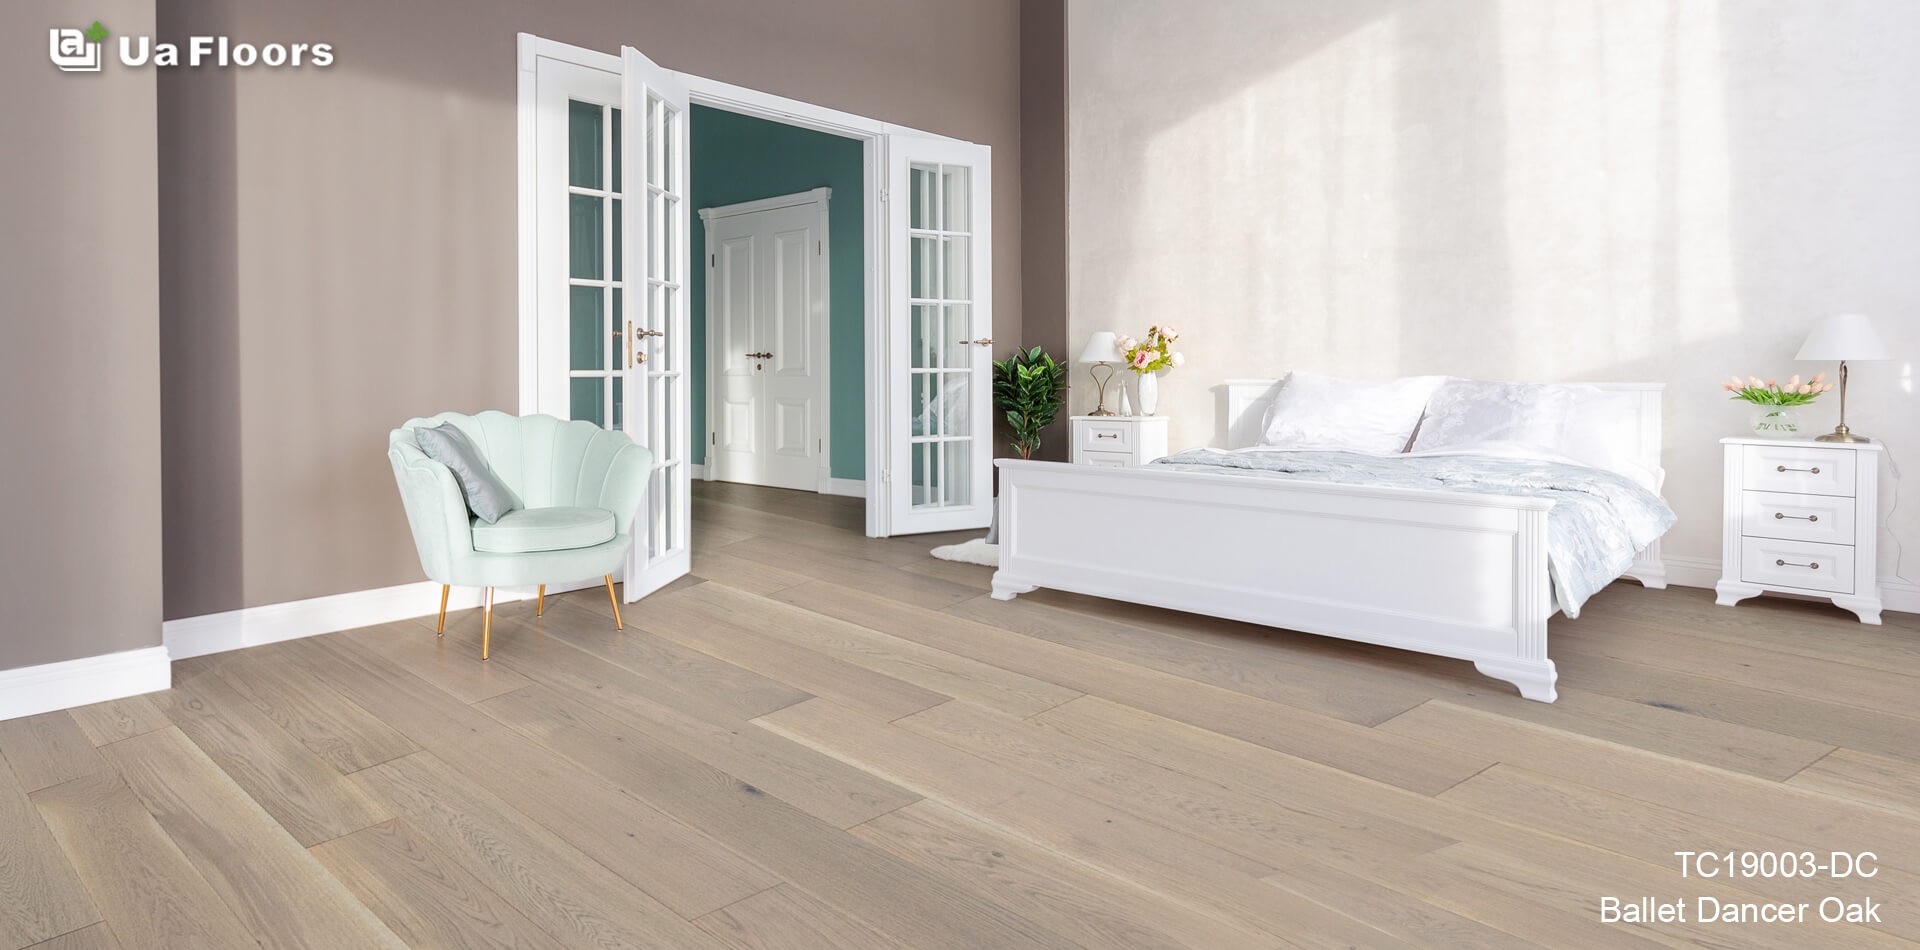 Laminate or Engineered Hardwood Flooring Products Which is Better